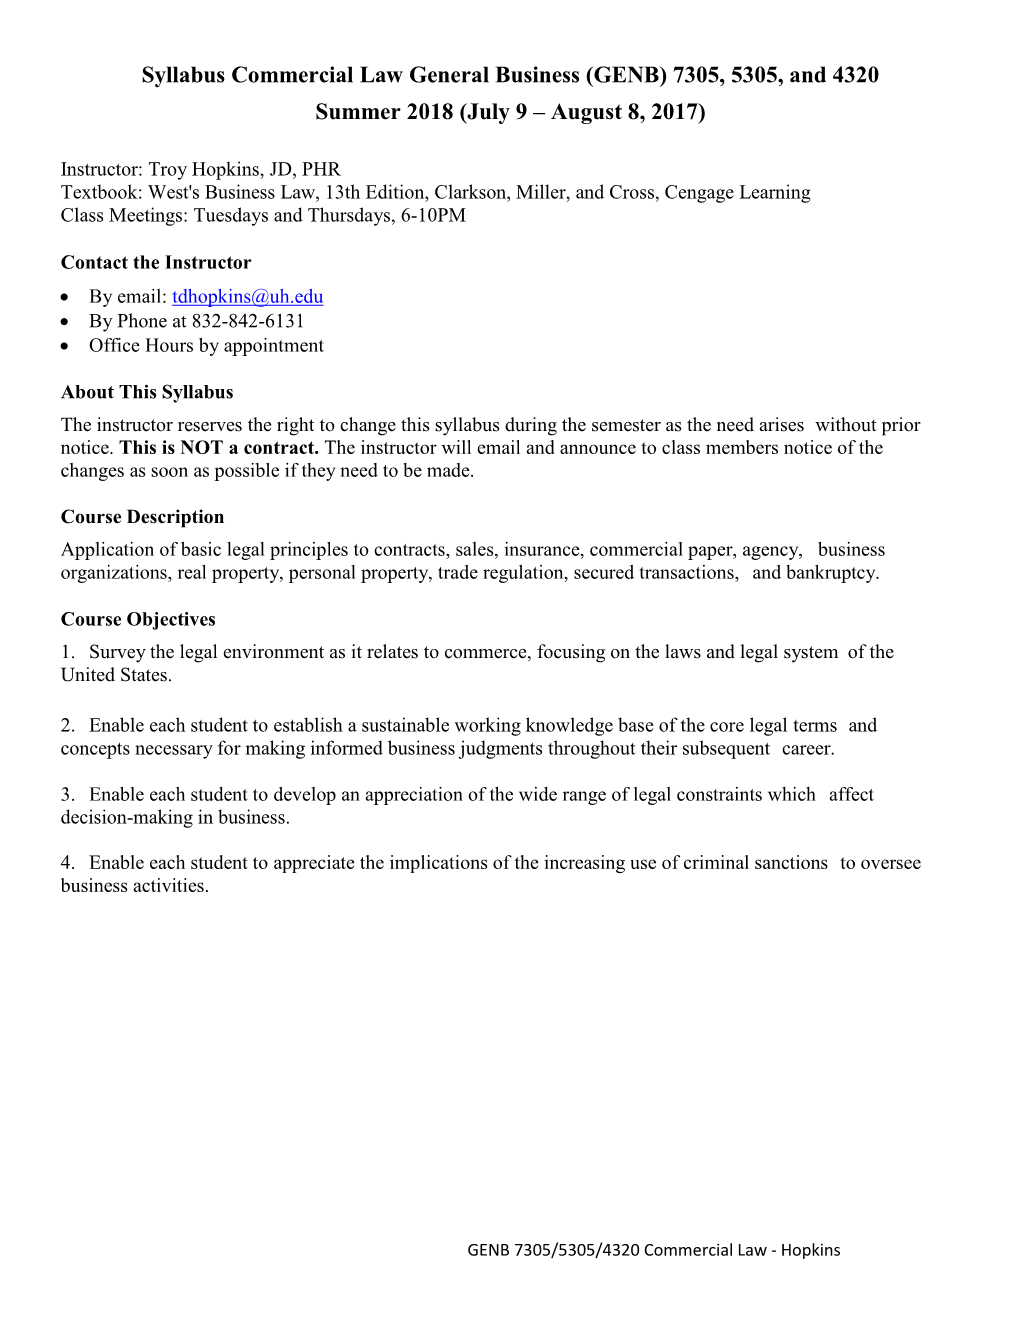 Syllabus Commercial Law General Business (GENB) 7305, 5305, and 4320 Summer 2018 (July 9 – August 8, 2017)